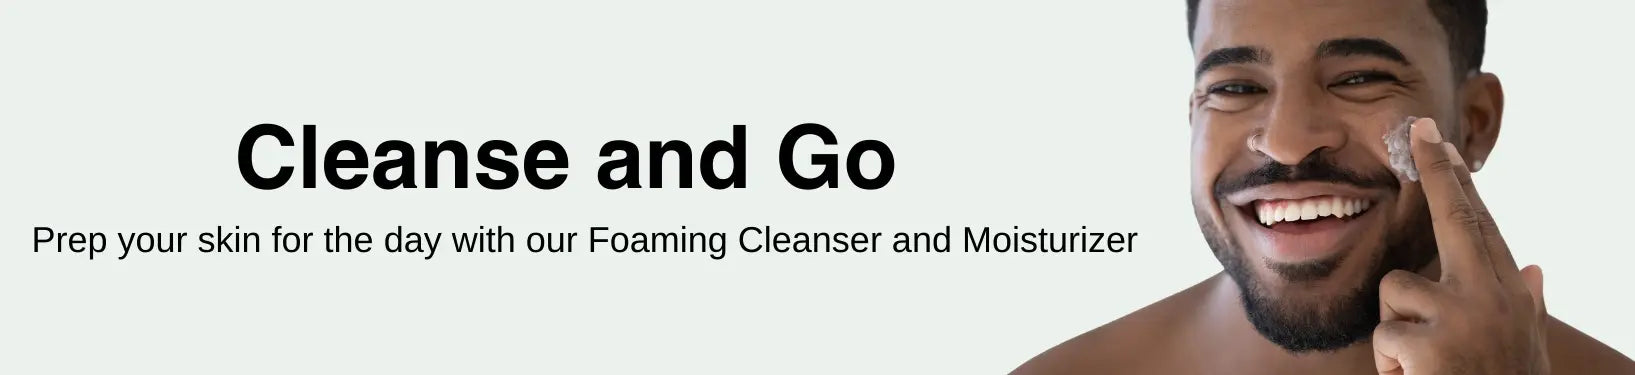 Cleanse and go banner image